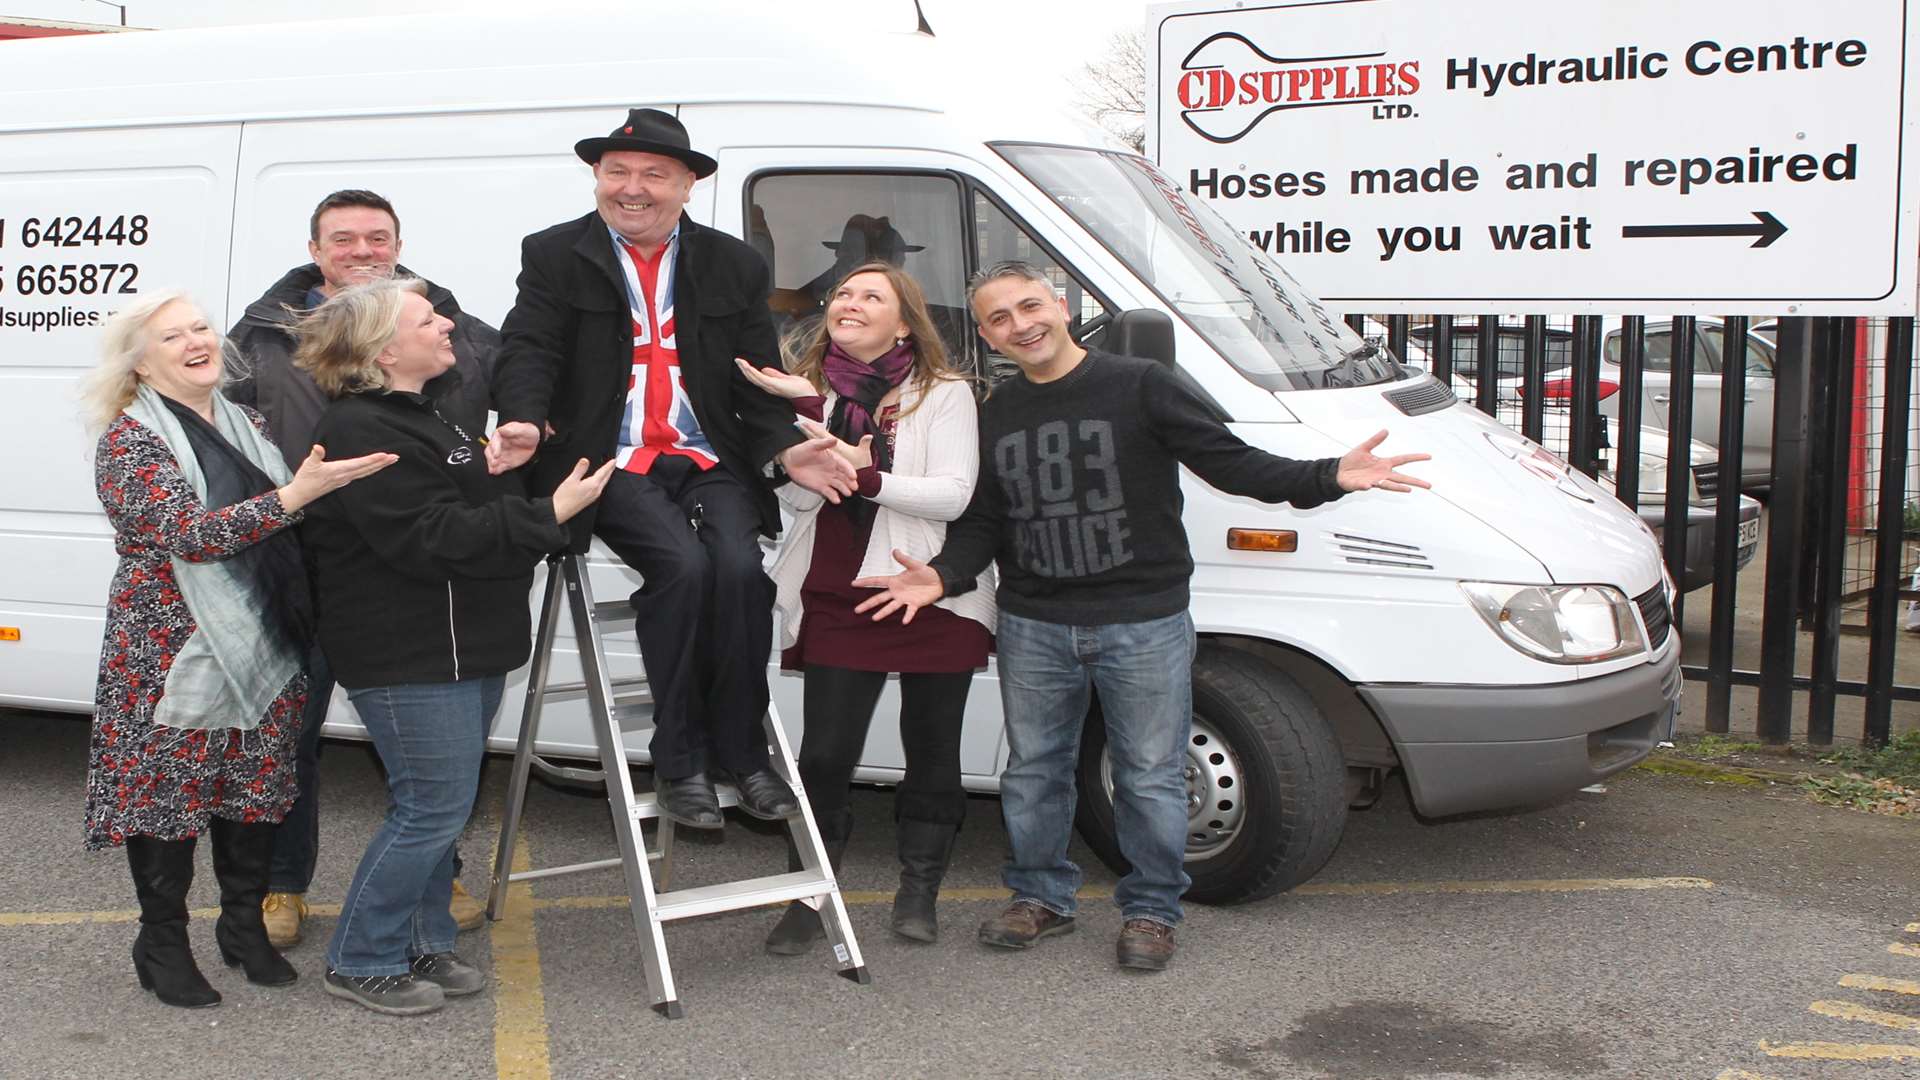 Owner Chris Driver, of CD Supplies, with family and staff